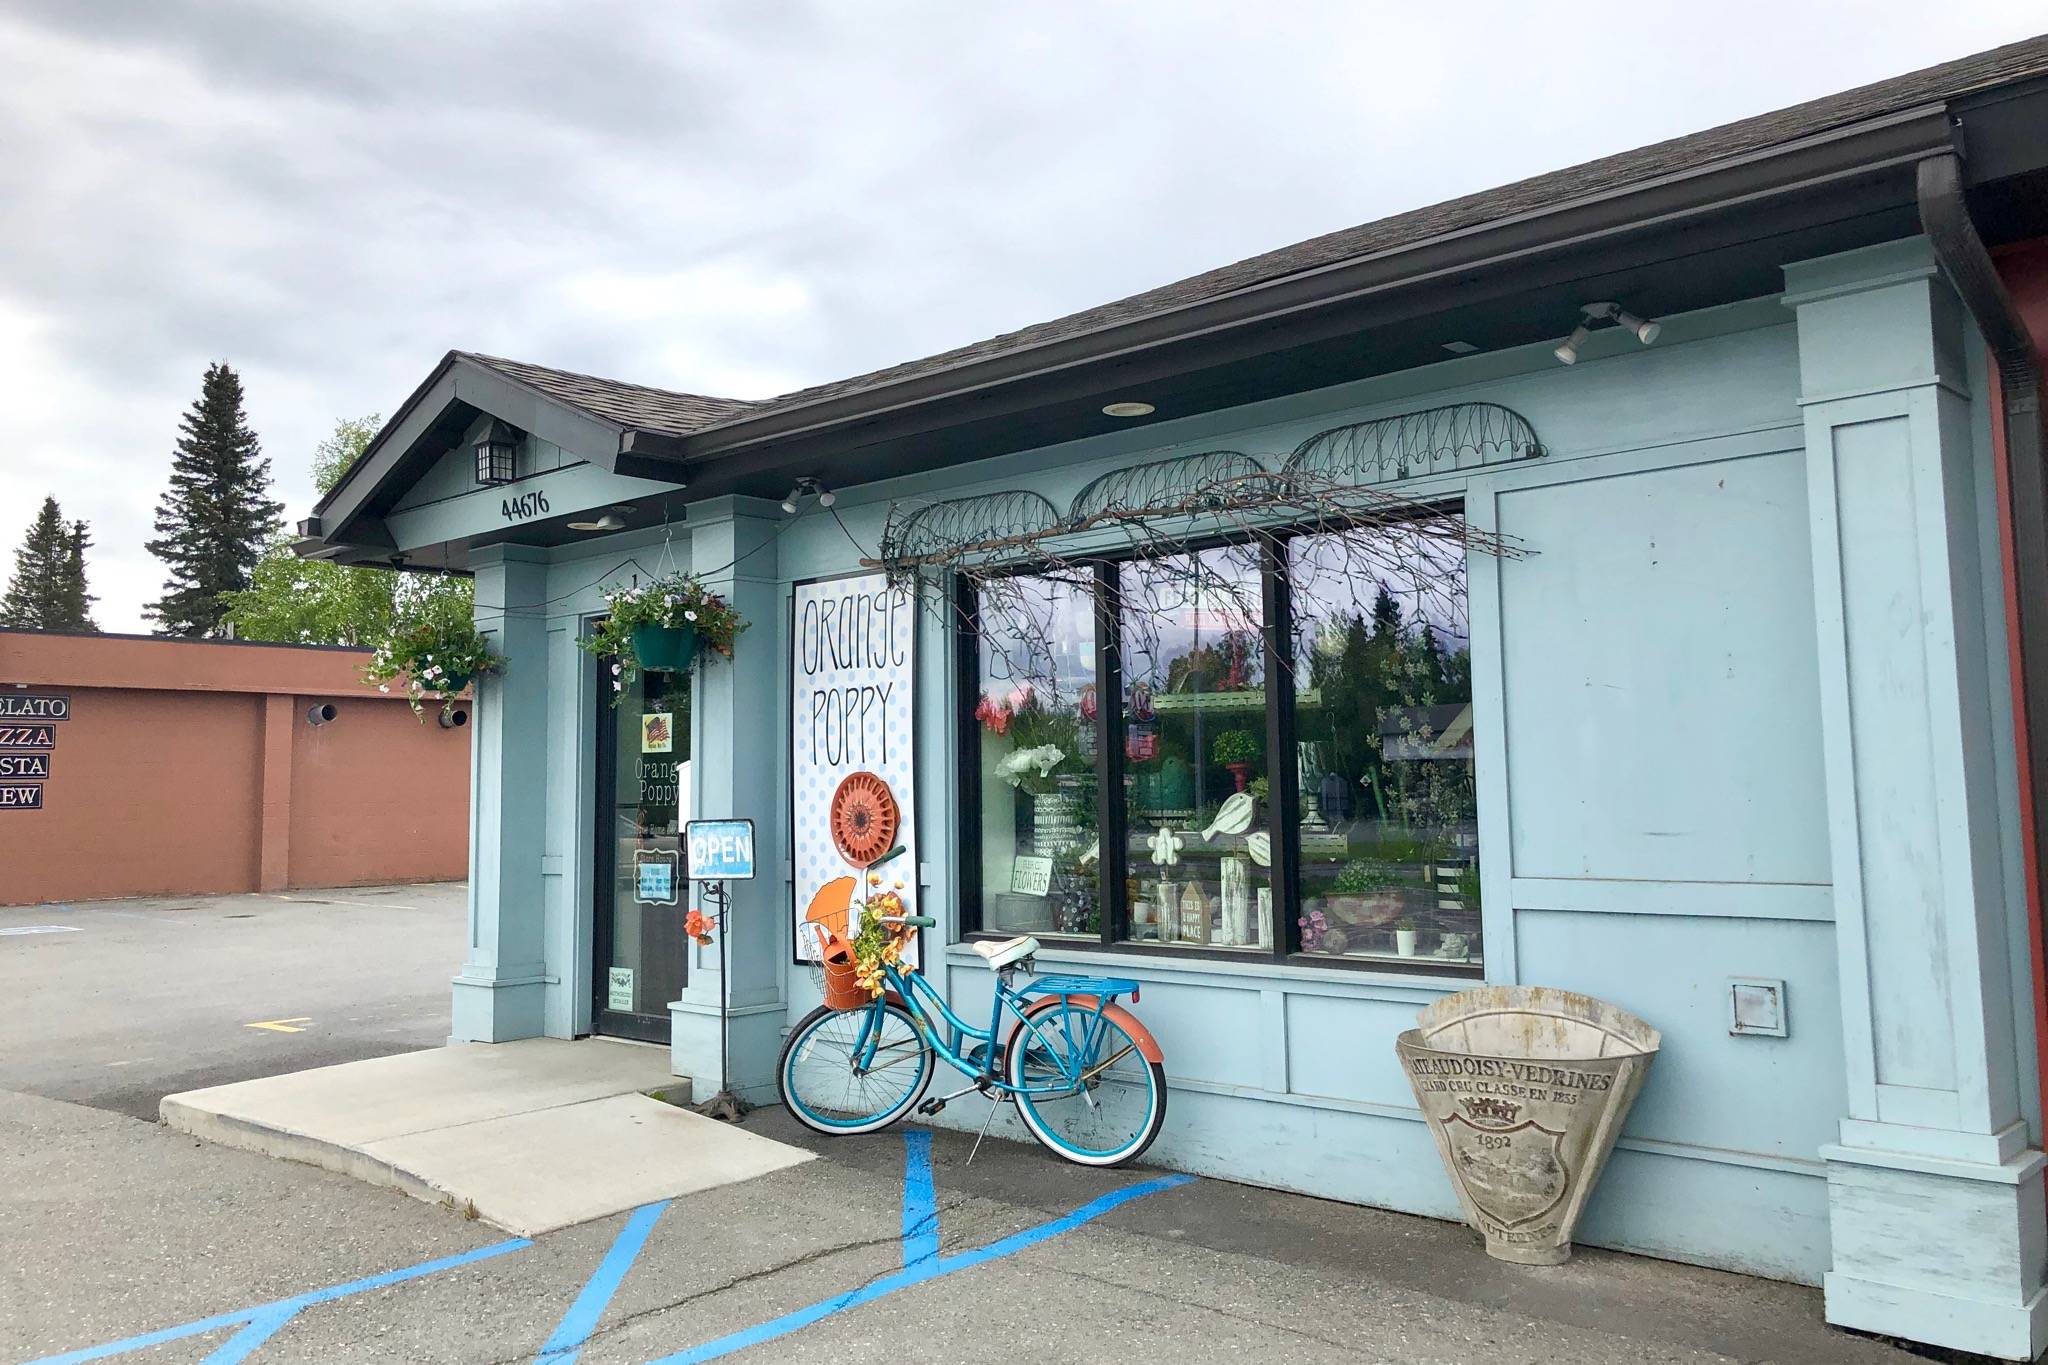 Orange Poppy, one of several businesses that have improved their storefronts with the help of Soldotna’s Storefront Improvement Program, is photographed Wednesday, May 29, 2019, in Soldotna, Alaska. The improvement program awards grants to local businesses wanting to beautify their building’s exterior. (Photo by Victoria Petersen/Peninsula Clarion)